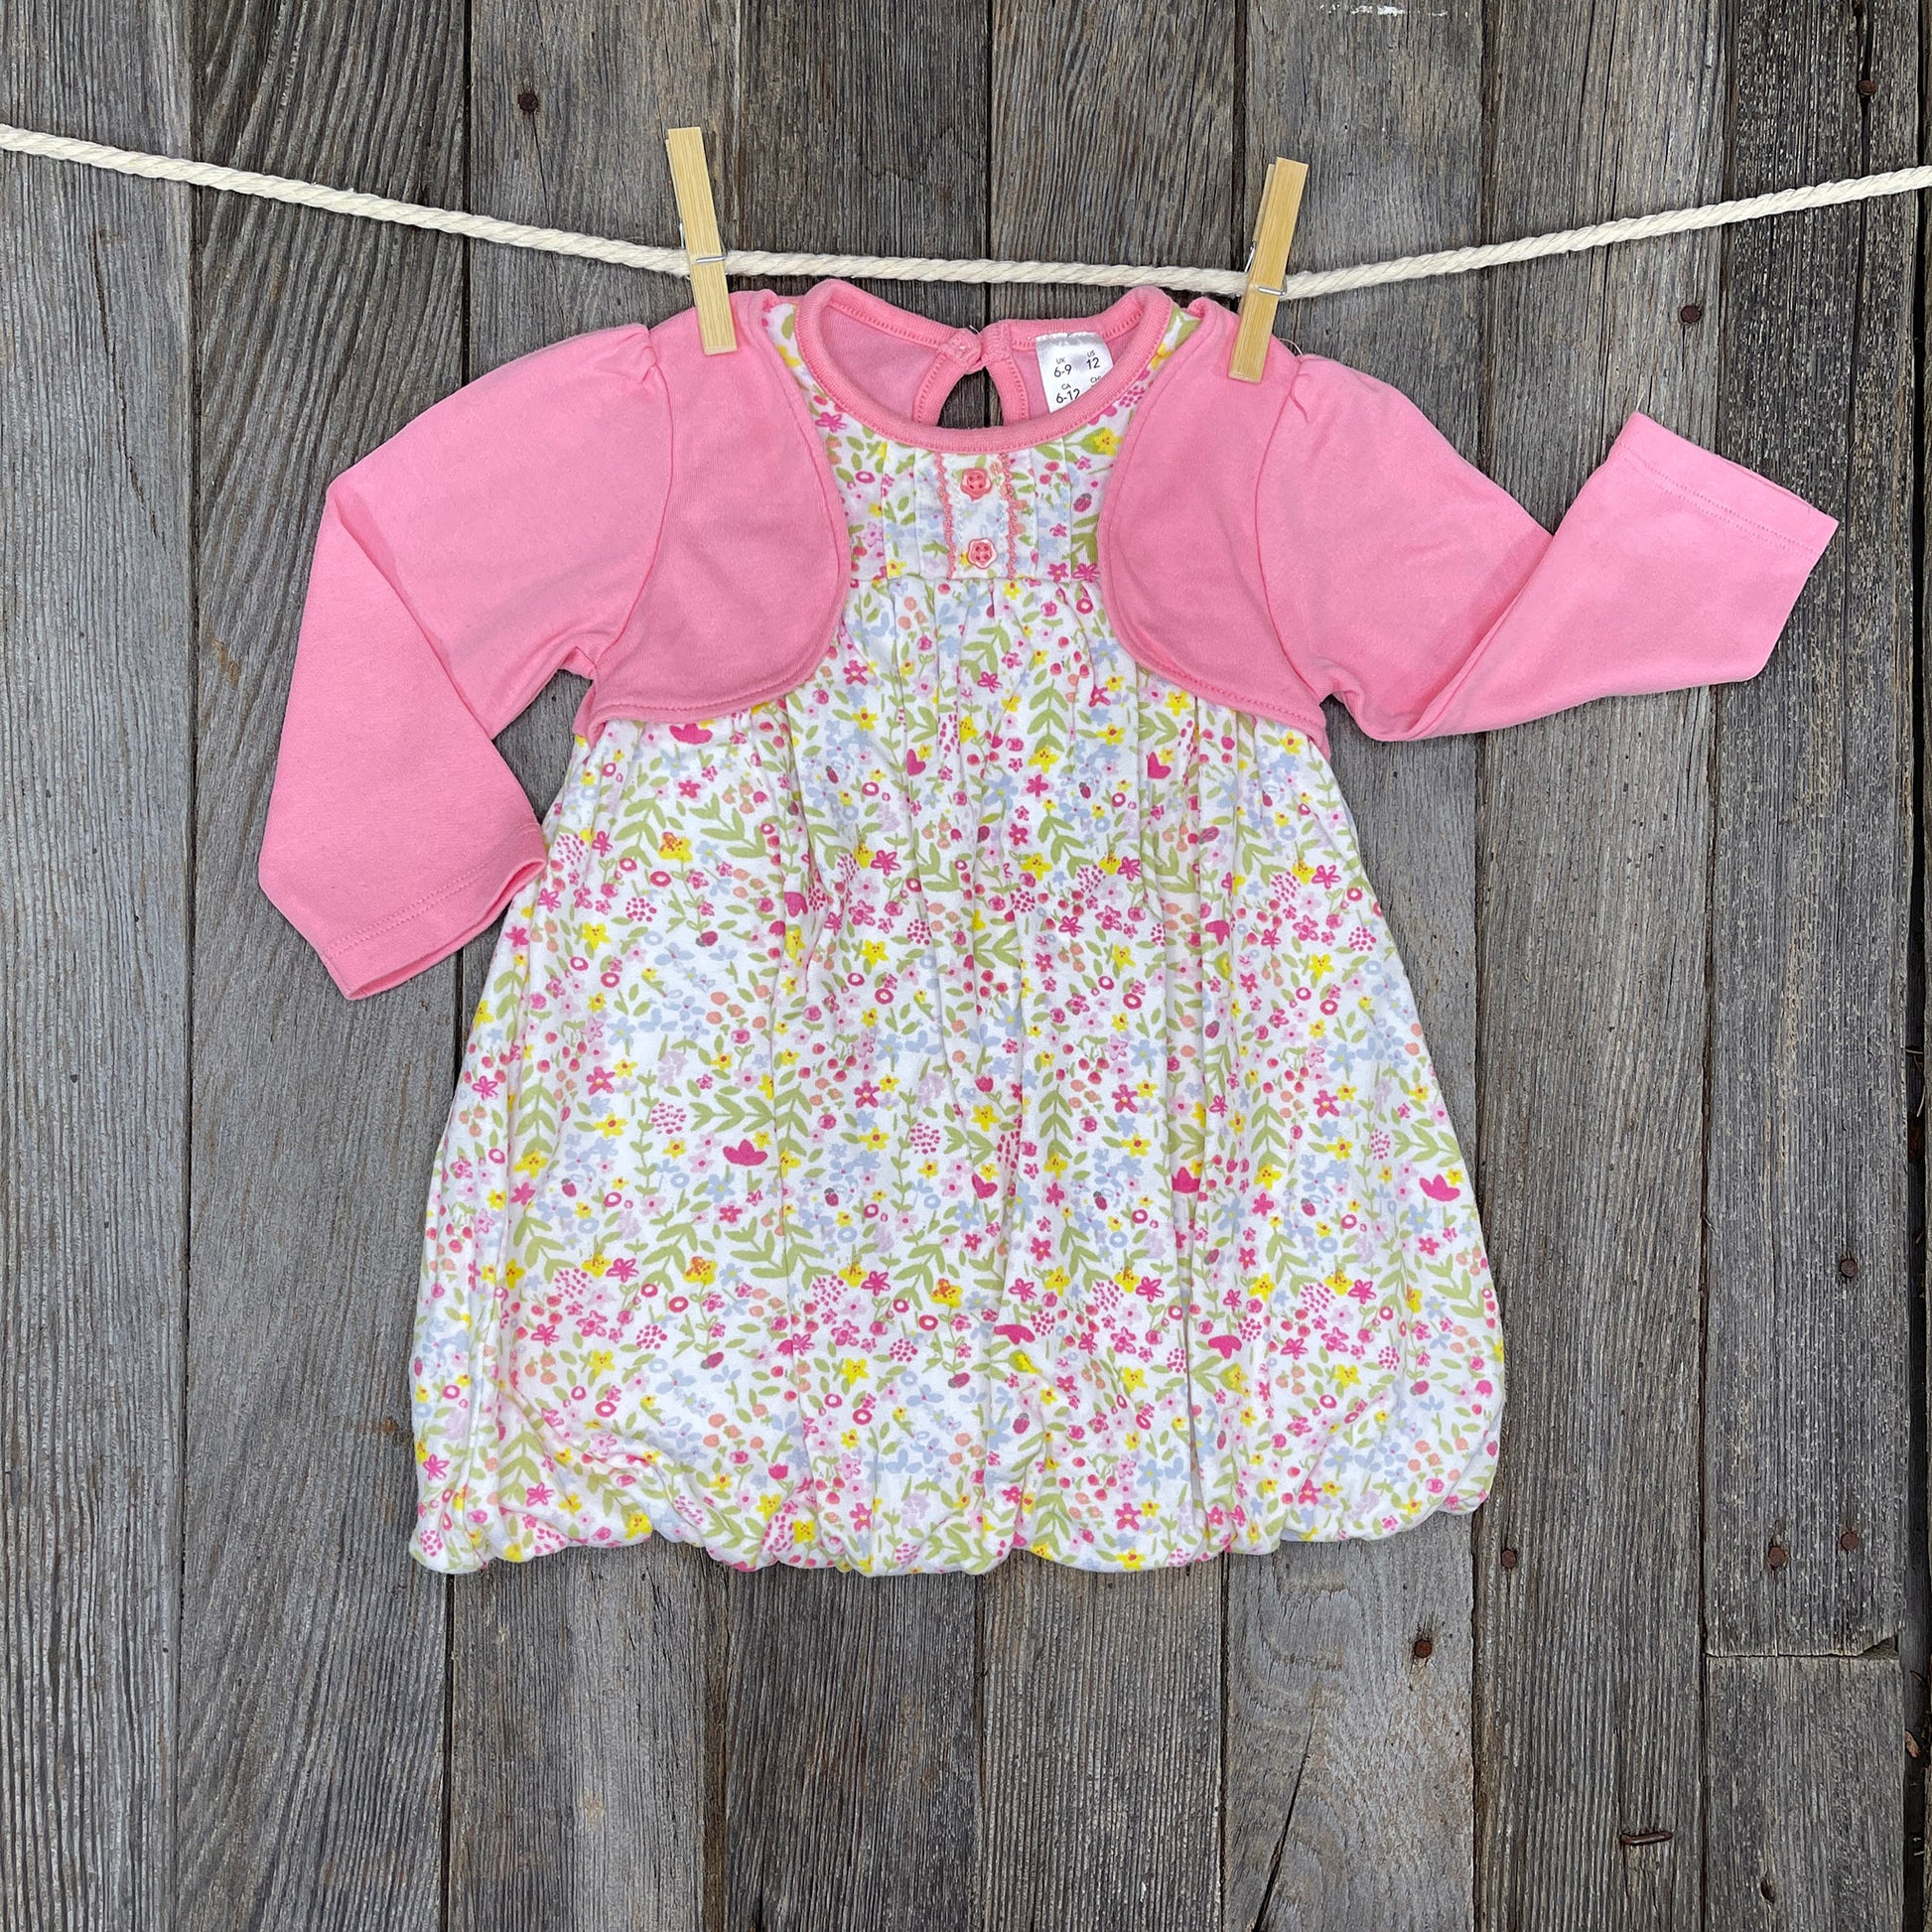 One Piece Outfit Dress 12-18 Months Essentials (7202337194162)